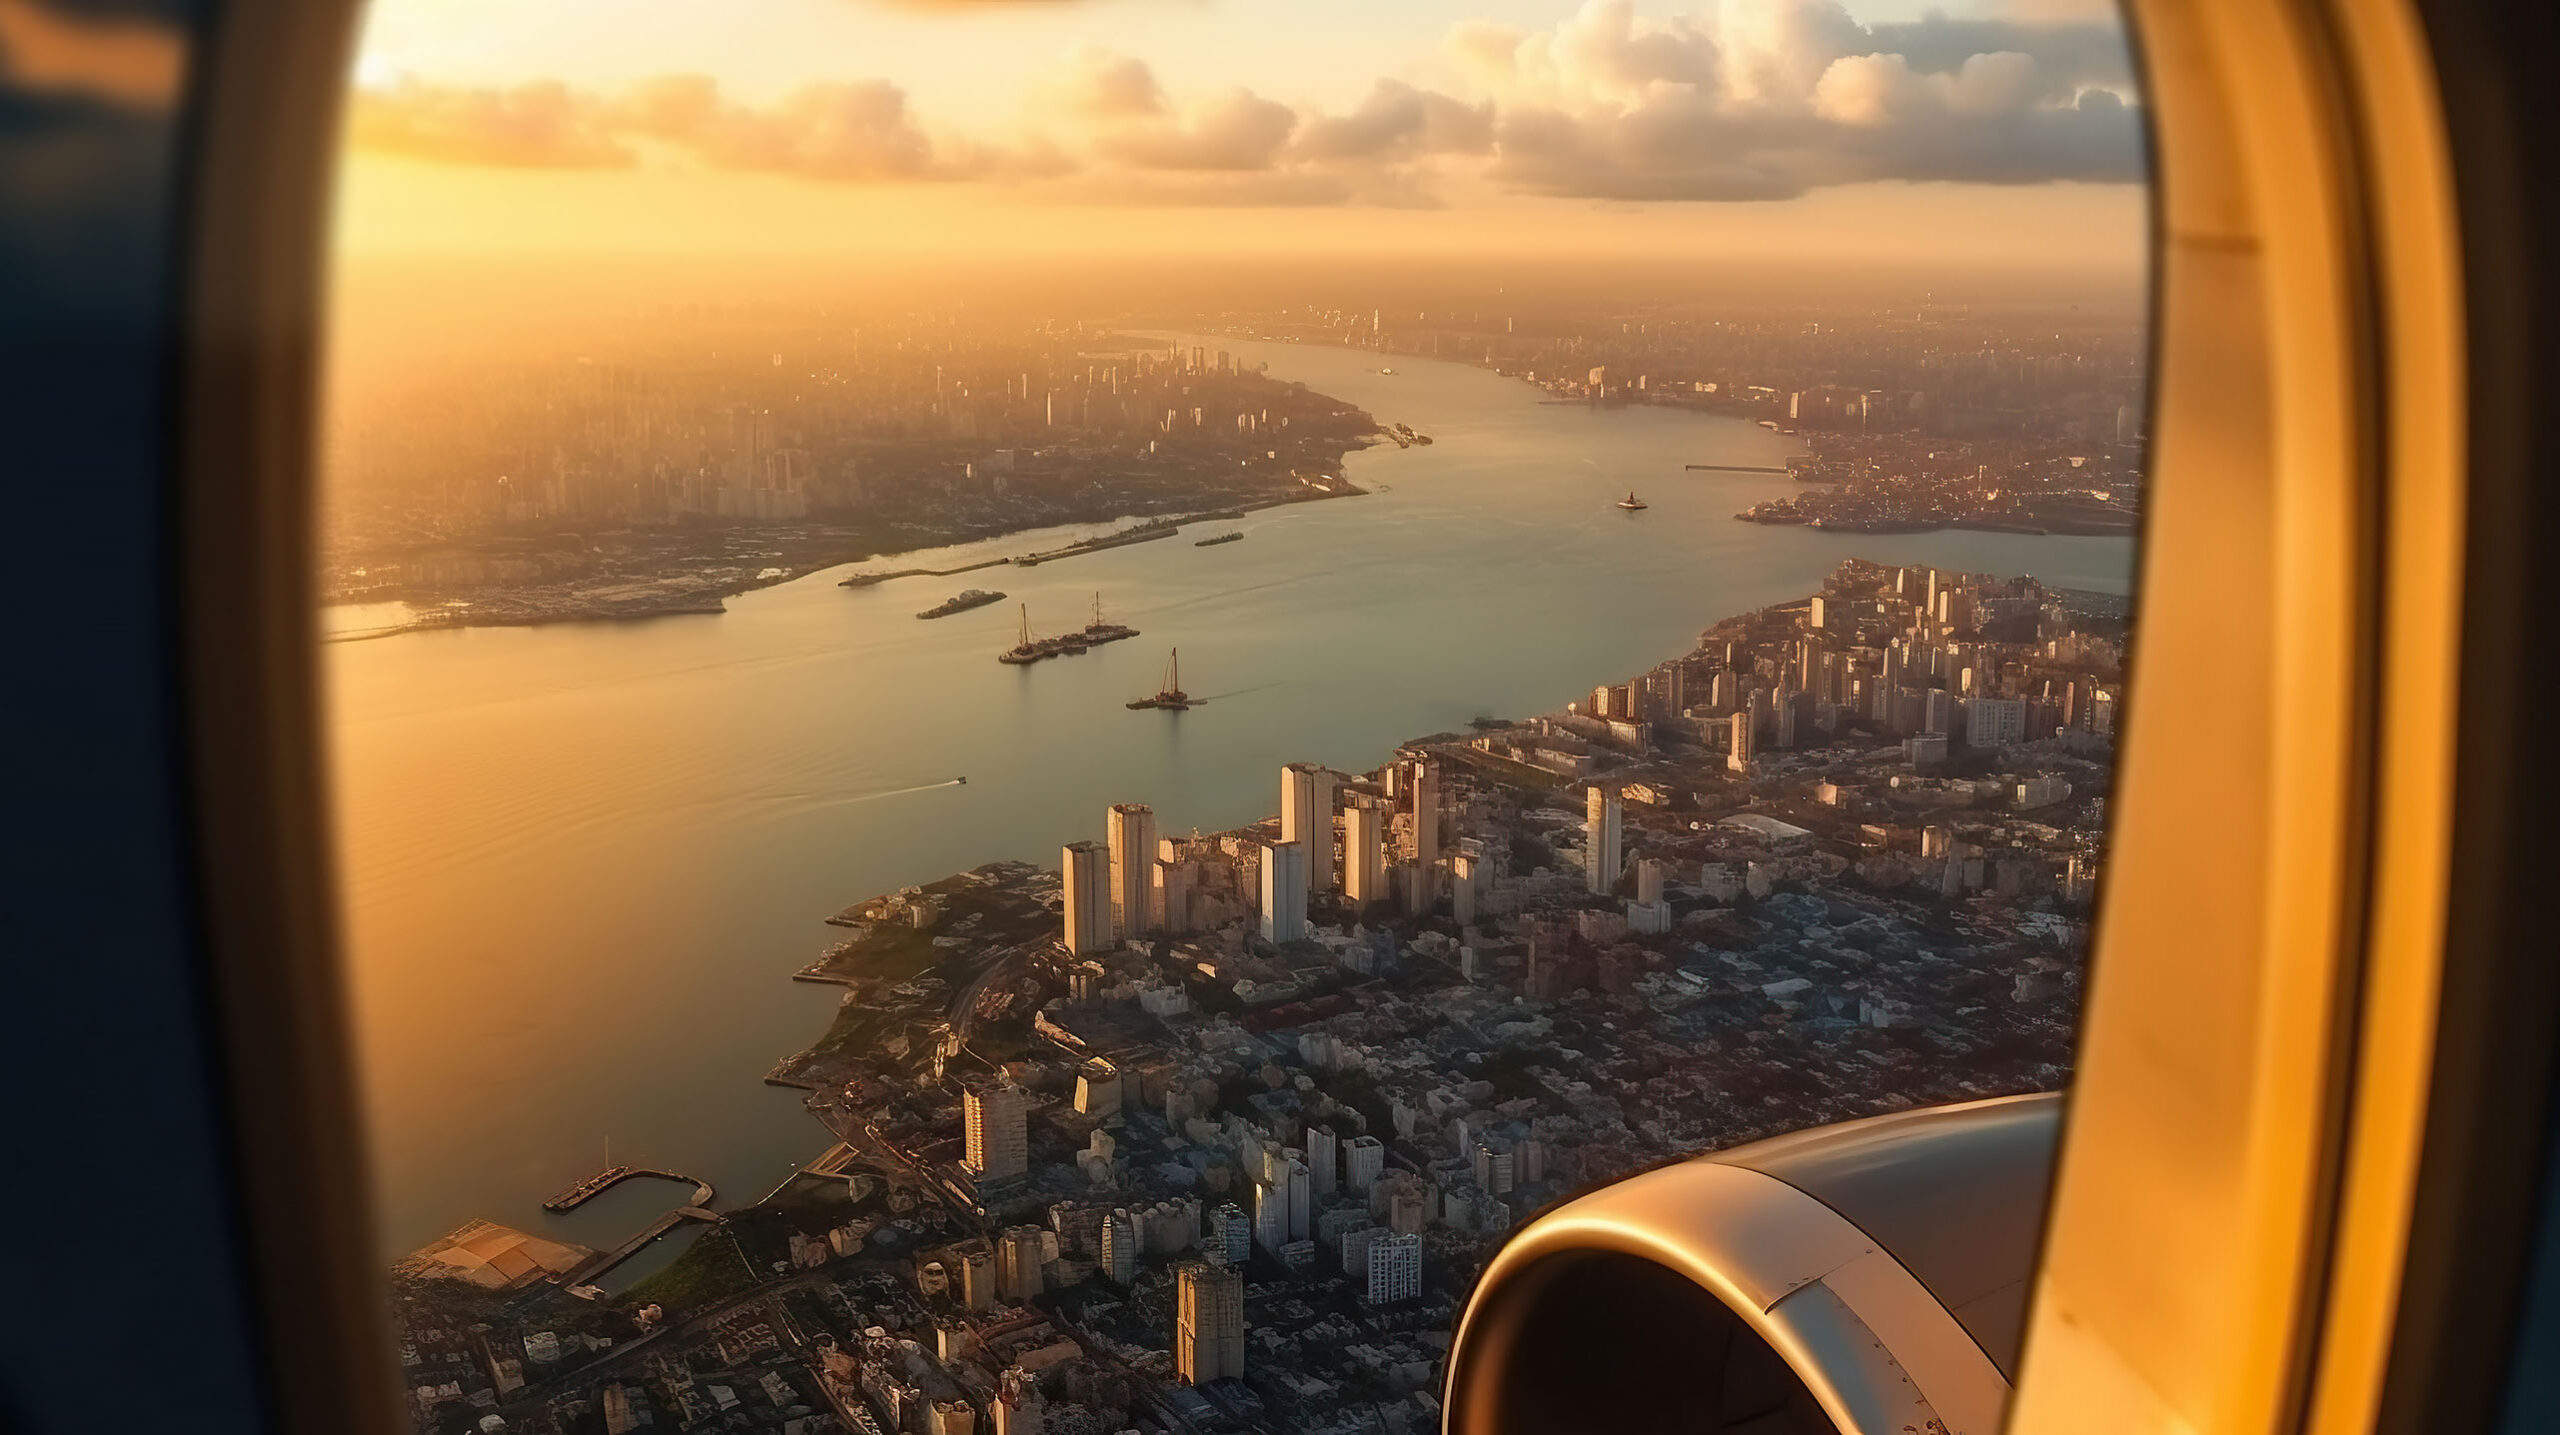 Aerial view of the city at sunset from an airplane window. Gener